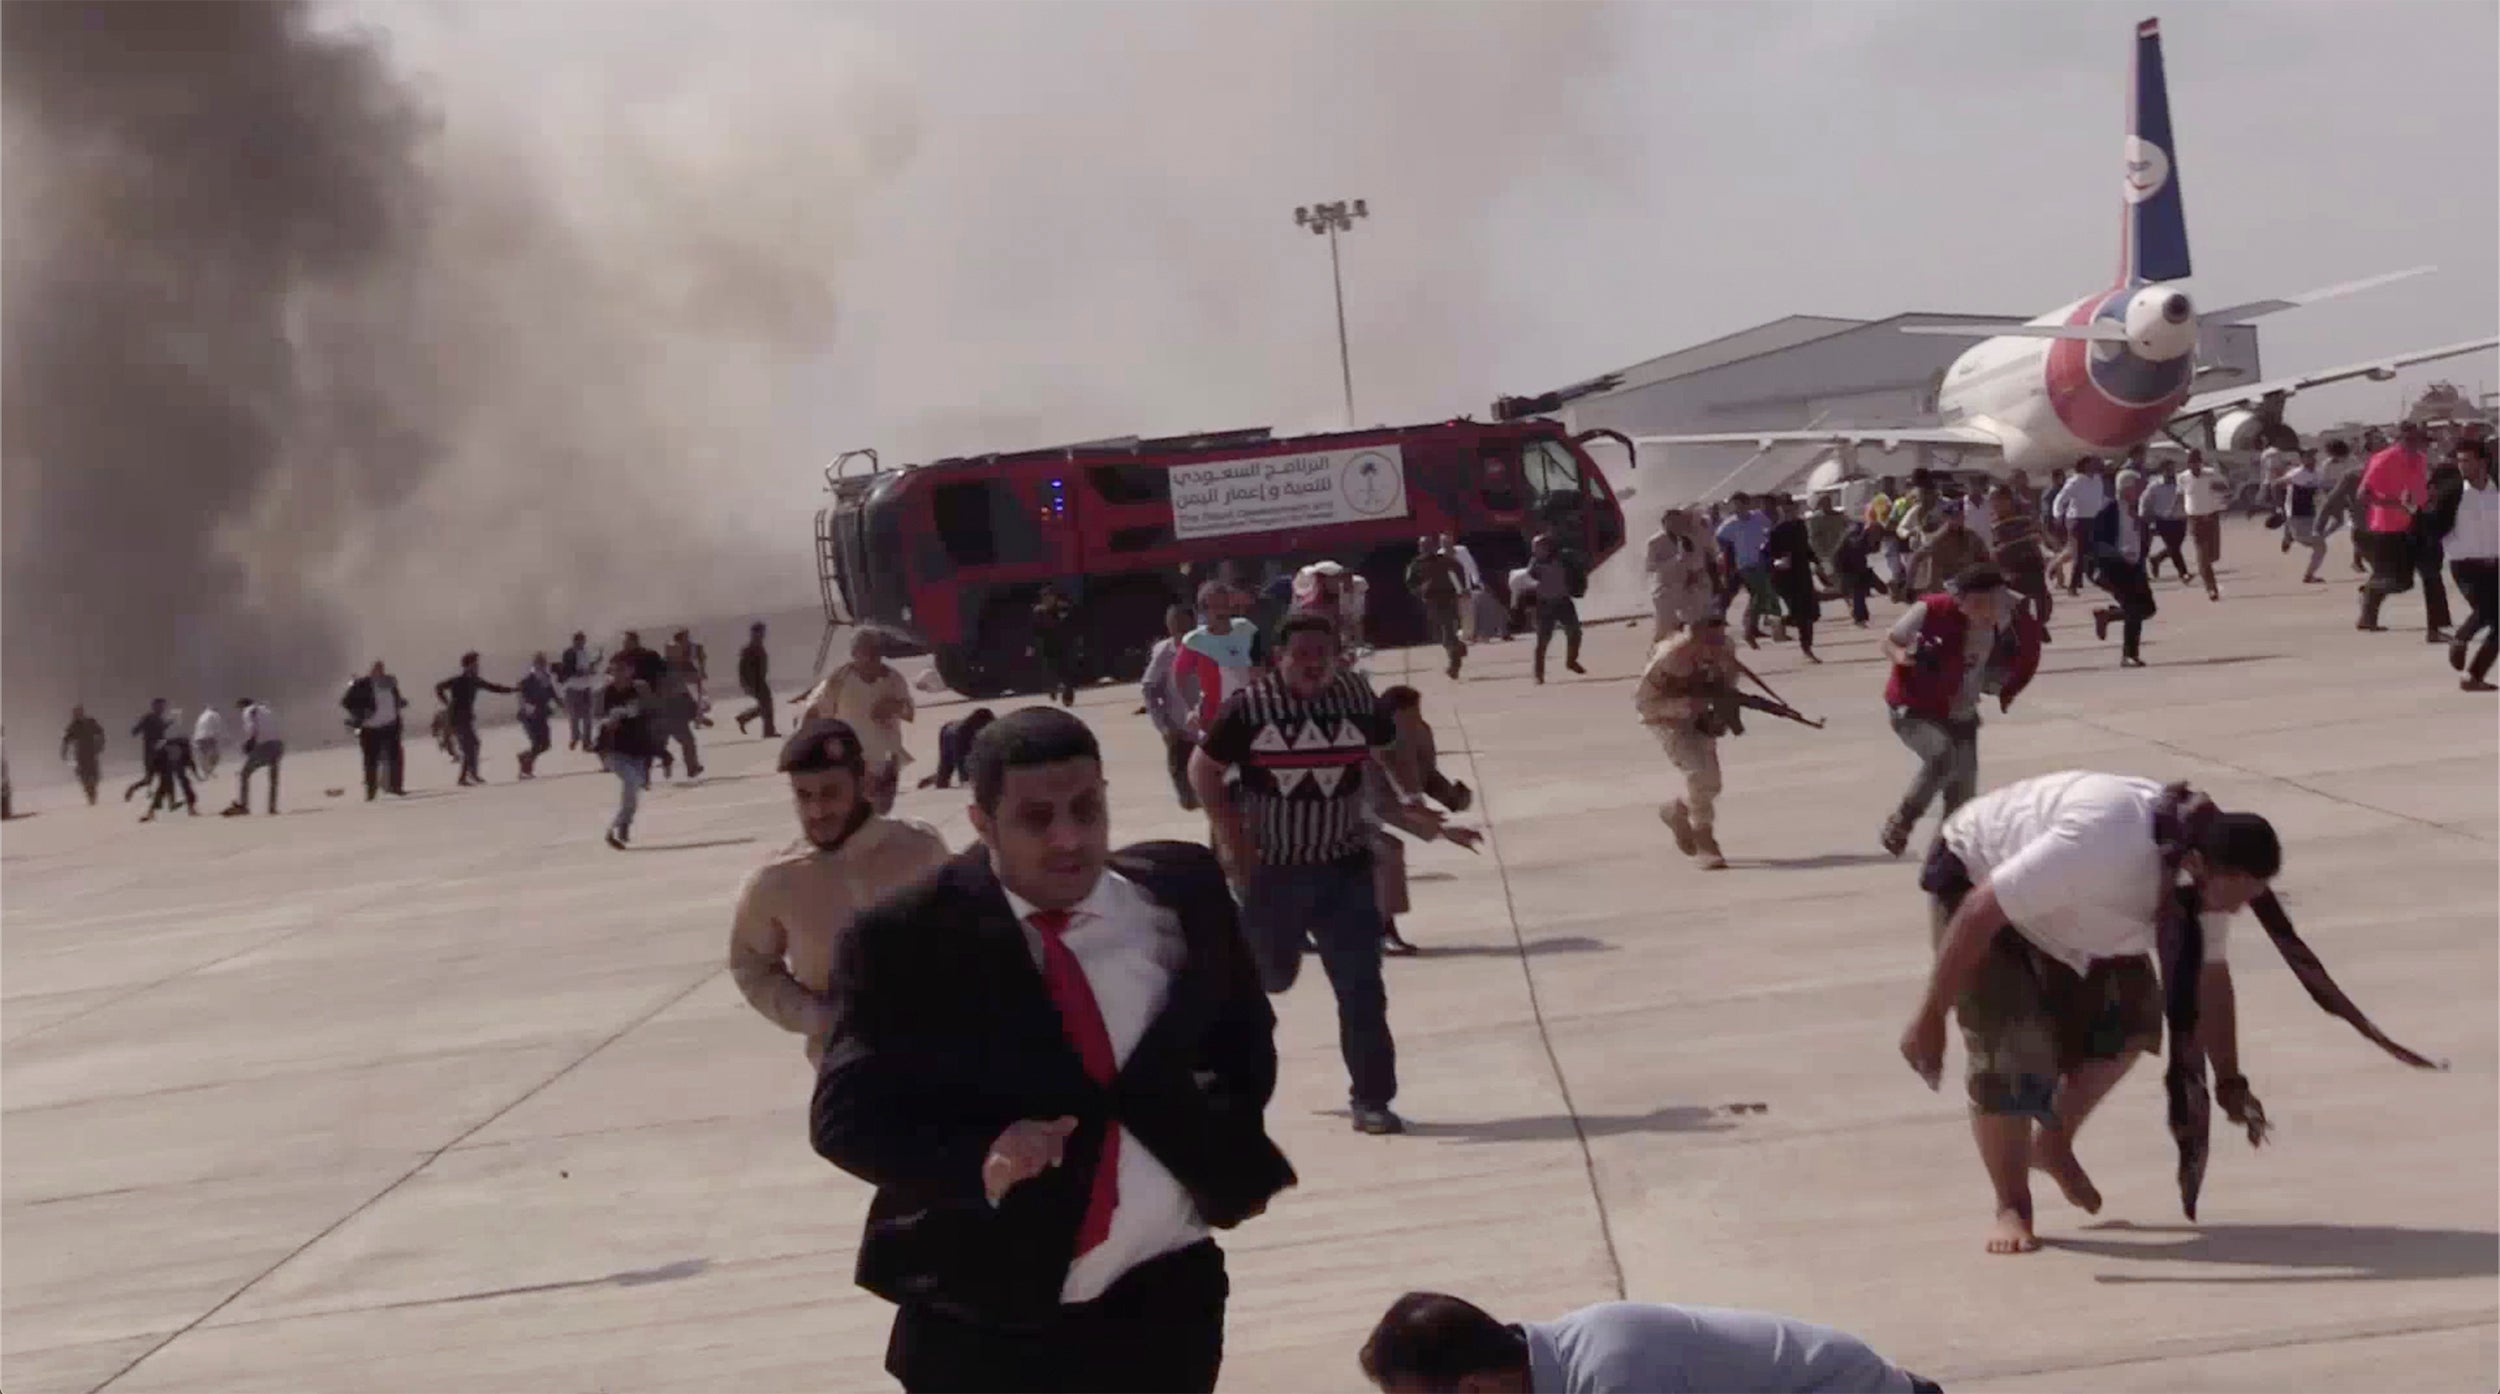 People run following an explosion at the airport in Aden